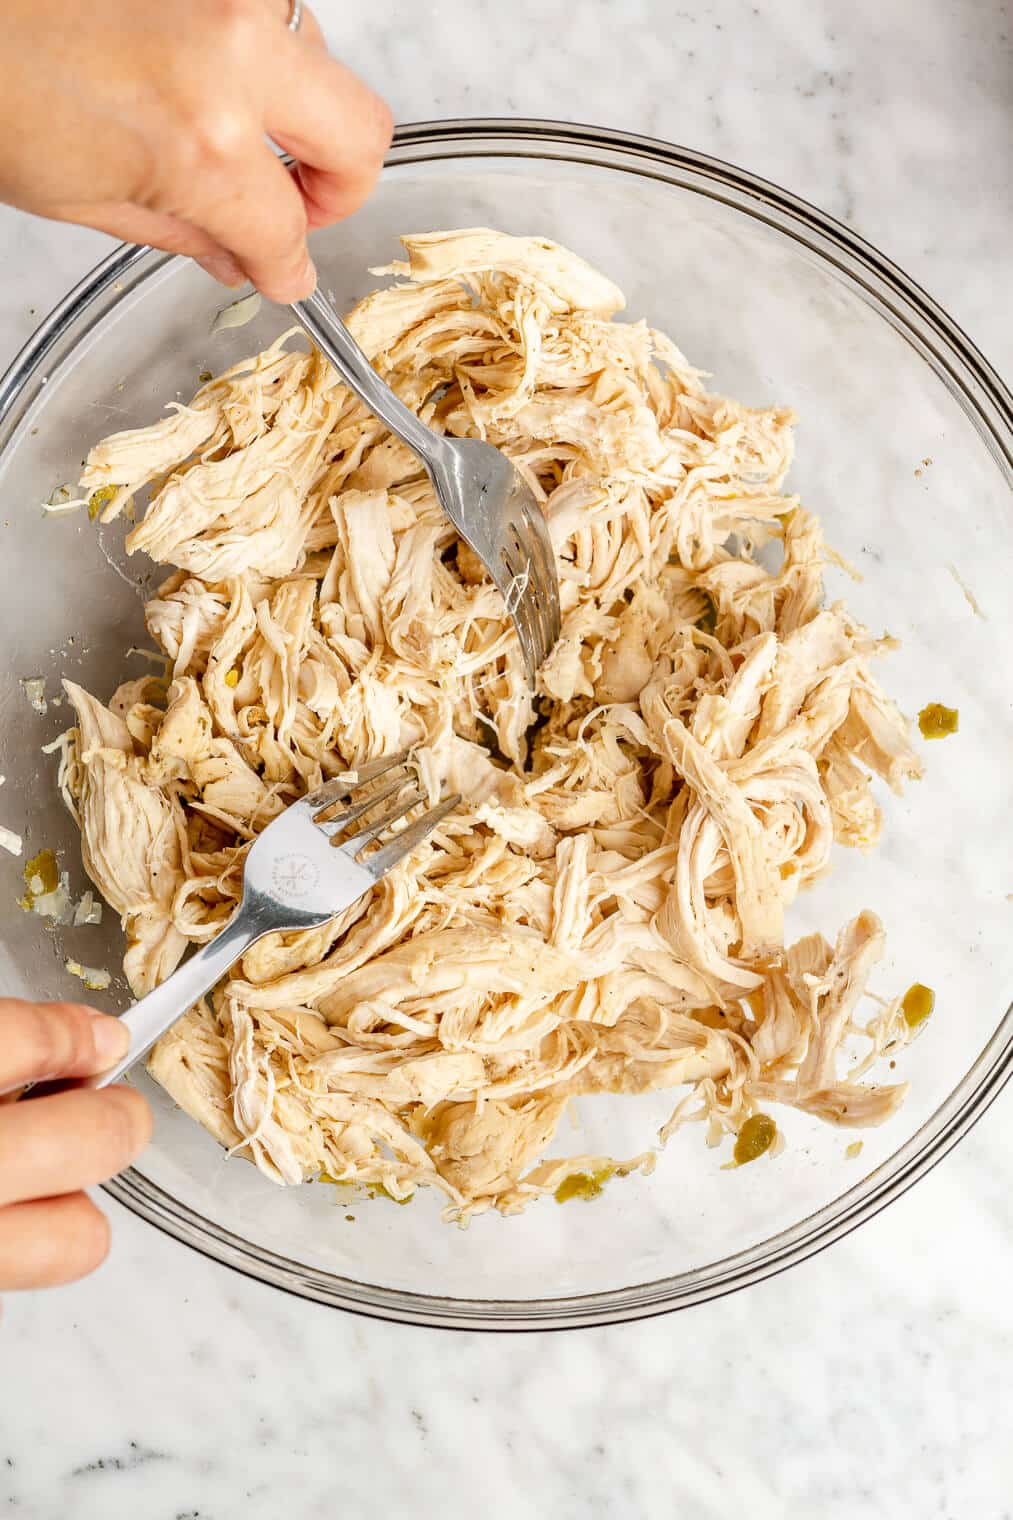 Cooked chicken breasts in a glass bowl being shredded with two forks.